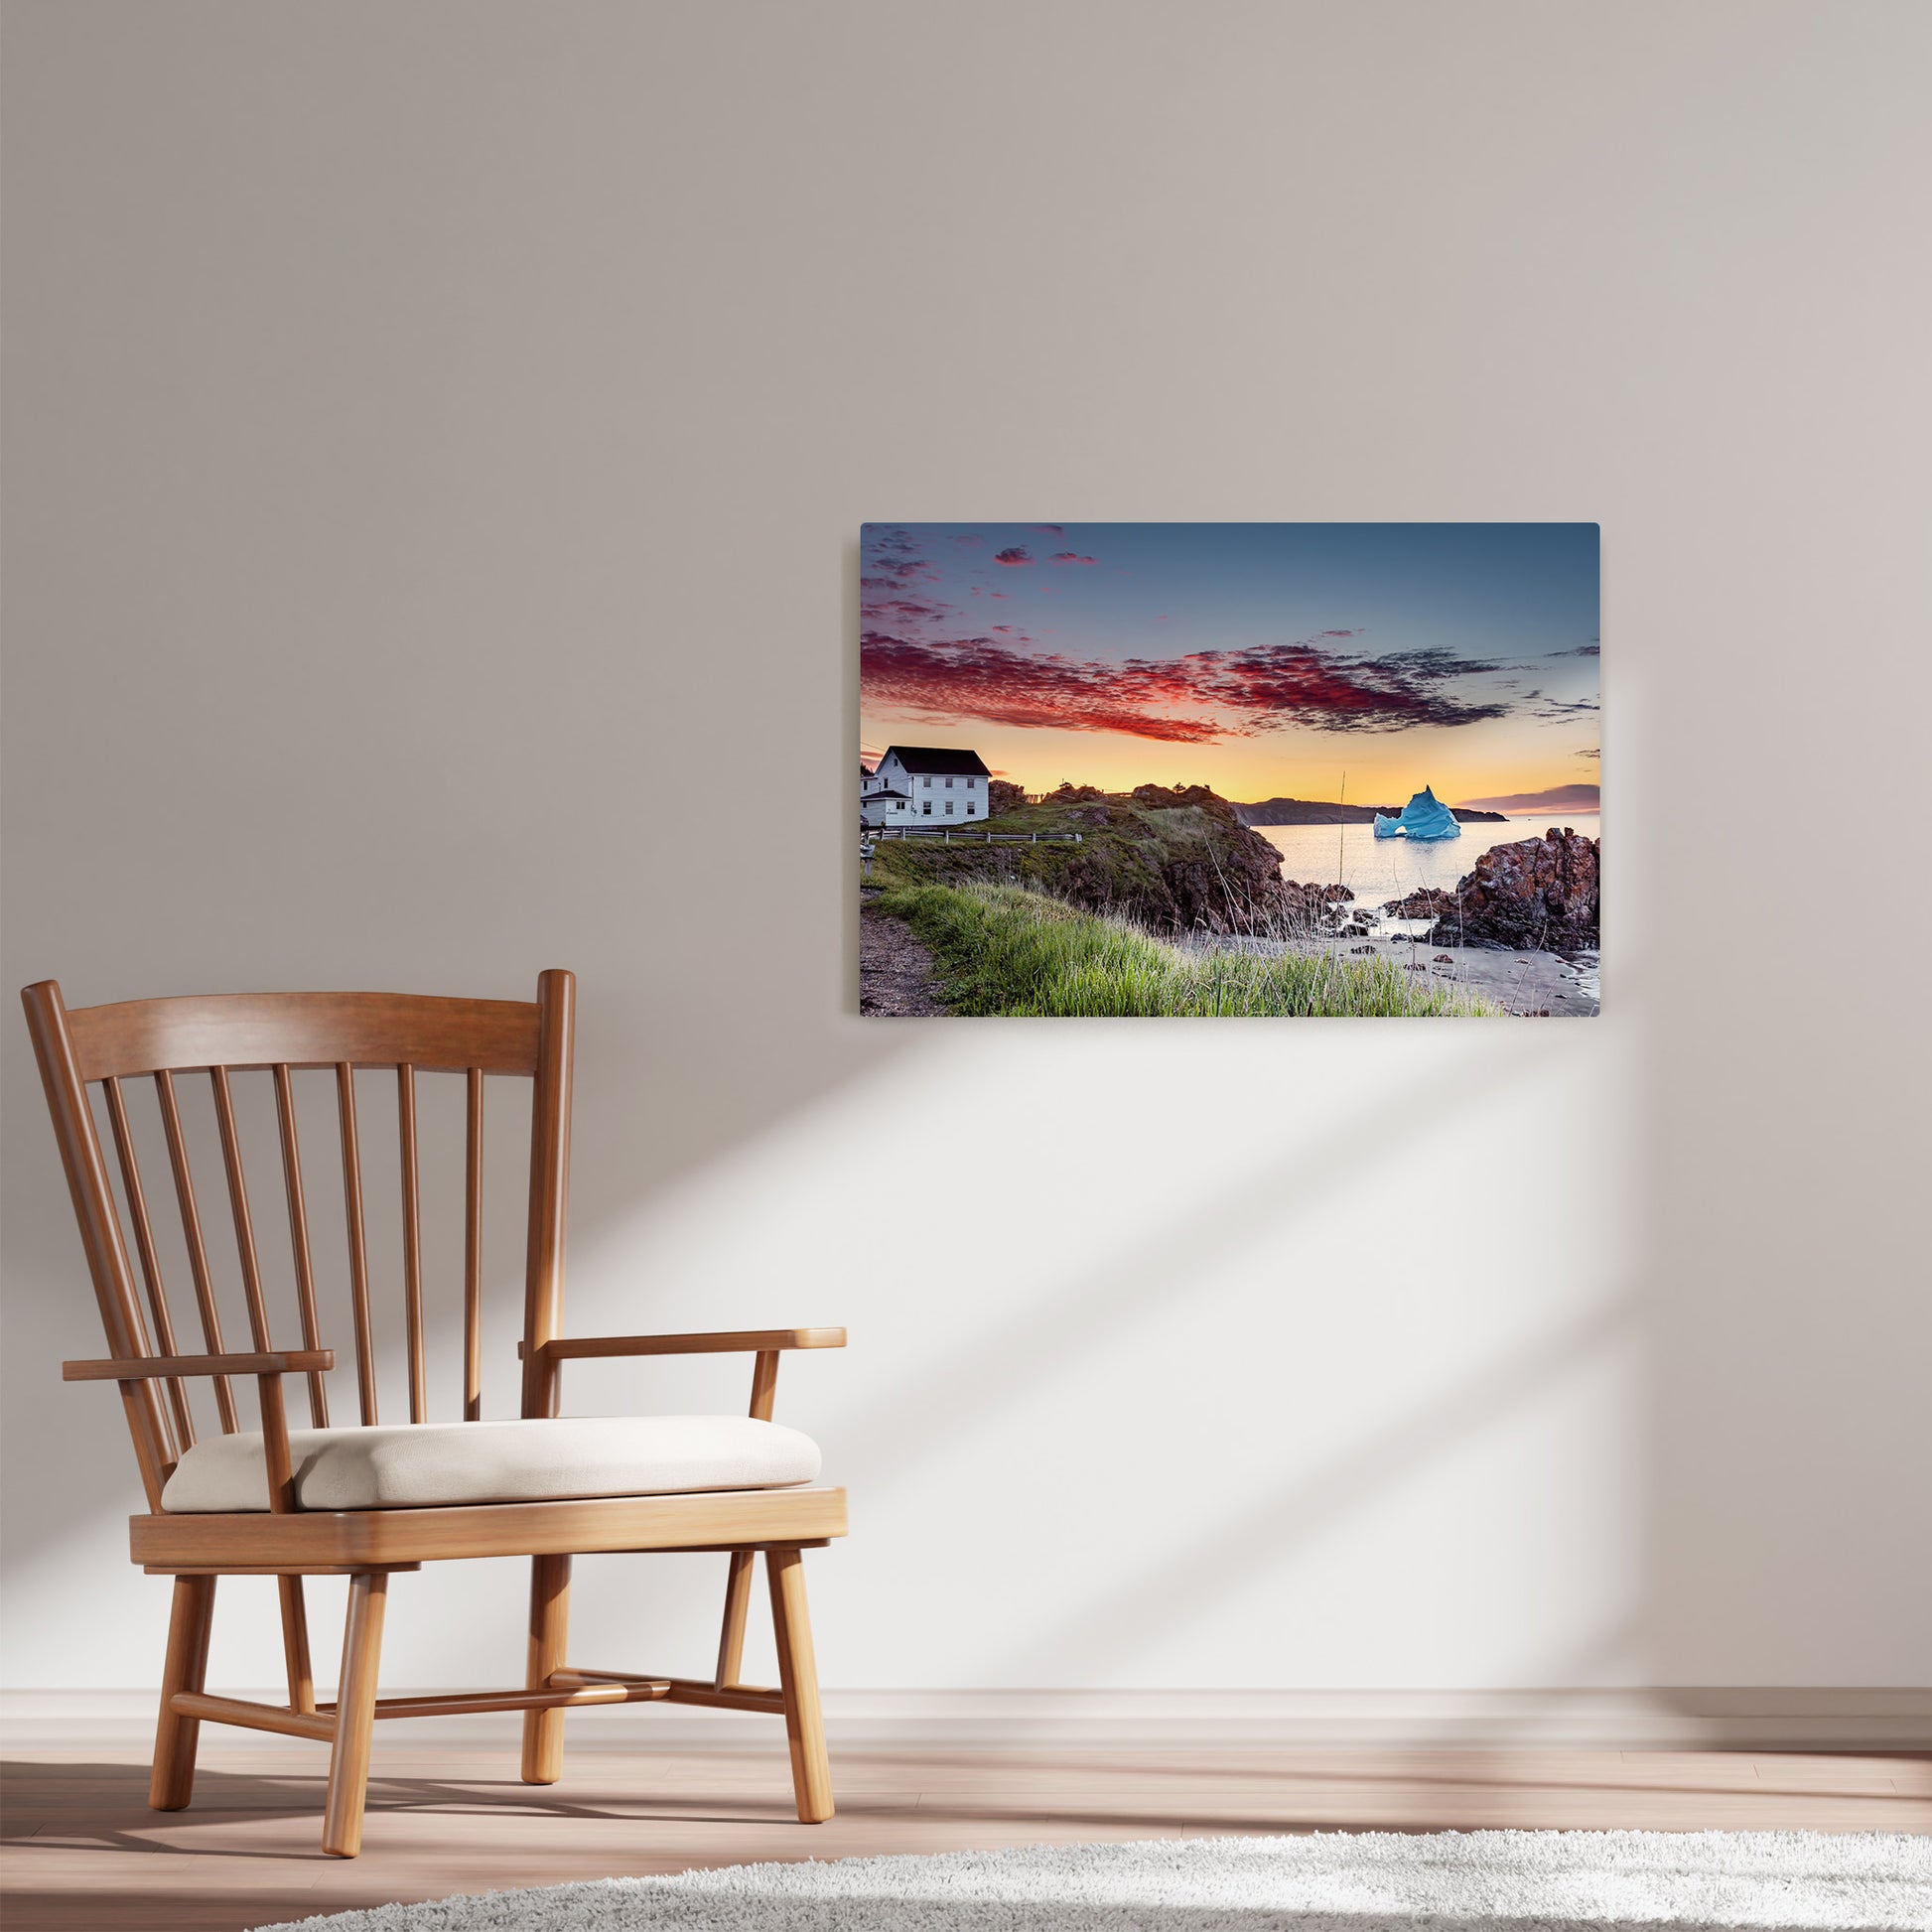 Ray Mackey's Twillingate Wild Cove Morning photography reproduced on HD metal print and displayed on wall